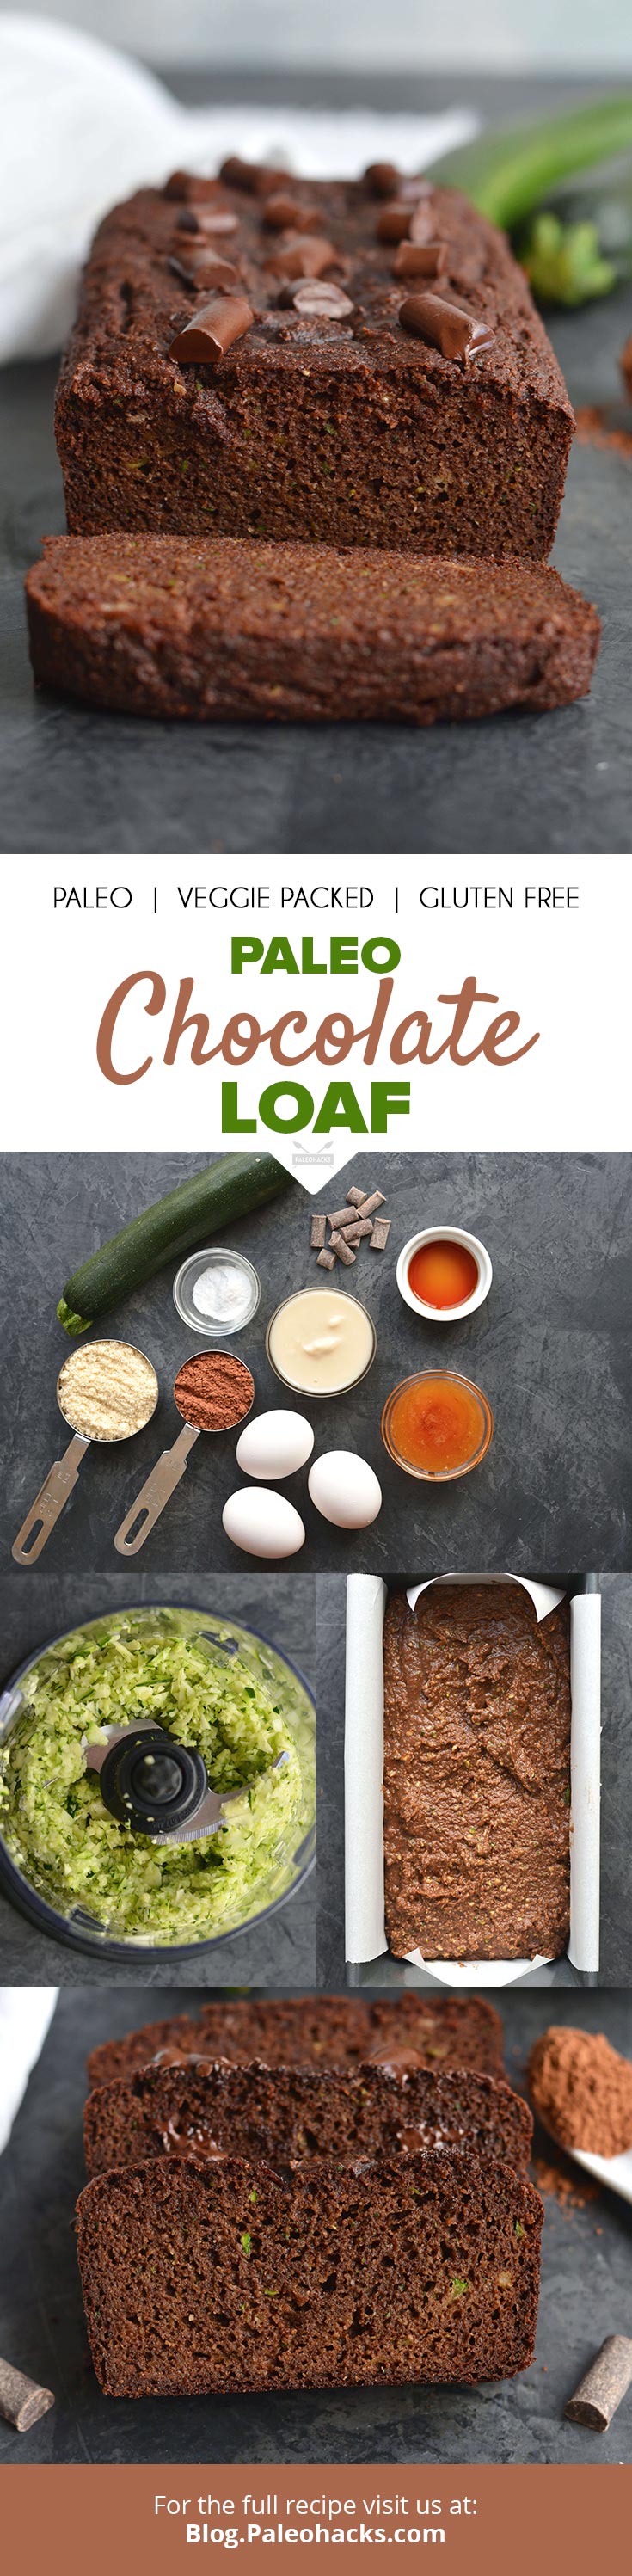 Trade-up your morning coffee shop's sugary pastries with this Paleo Chocolate Loaf recipe. It's perfect for chocolate lovers and satisfies any sweet tooth.